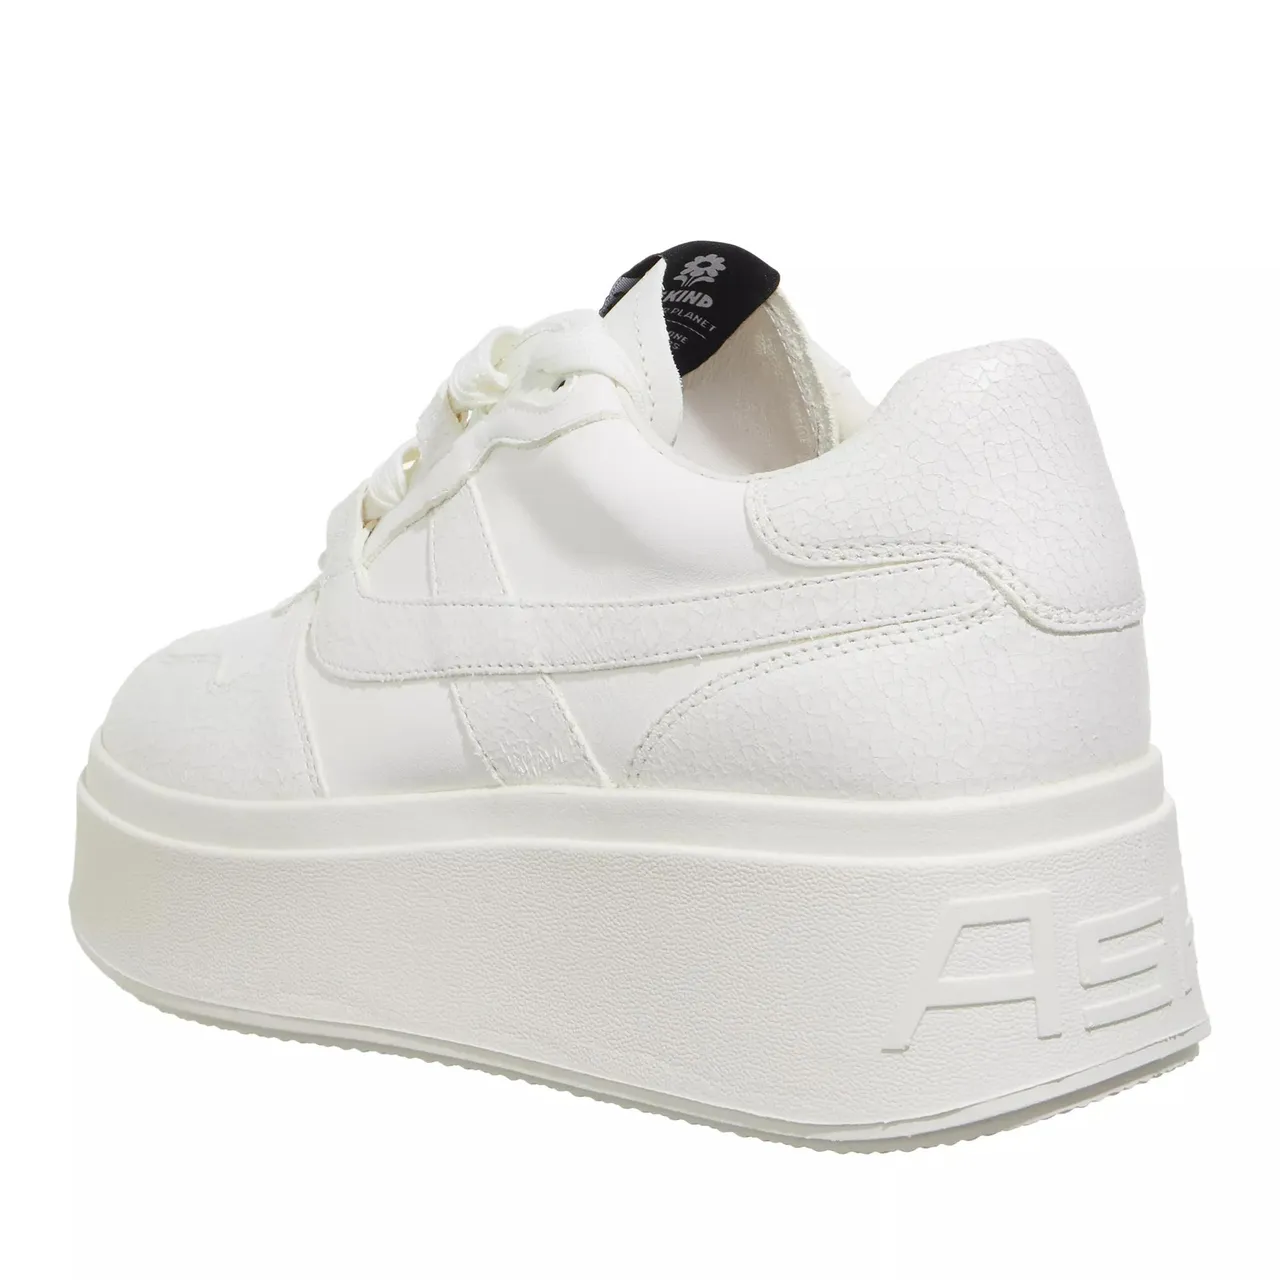 Ash Sneakers - Match01 - white - Sneakers for ladies